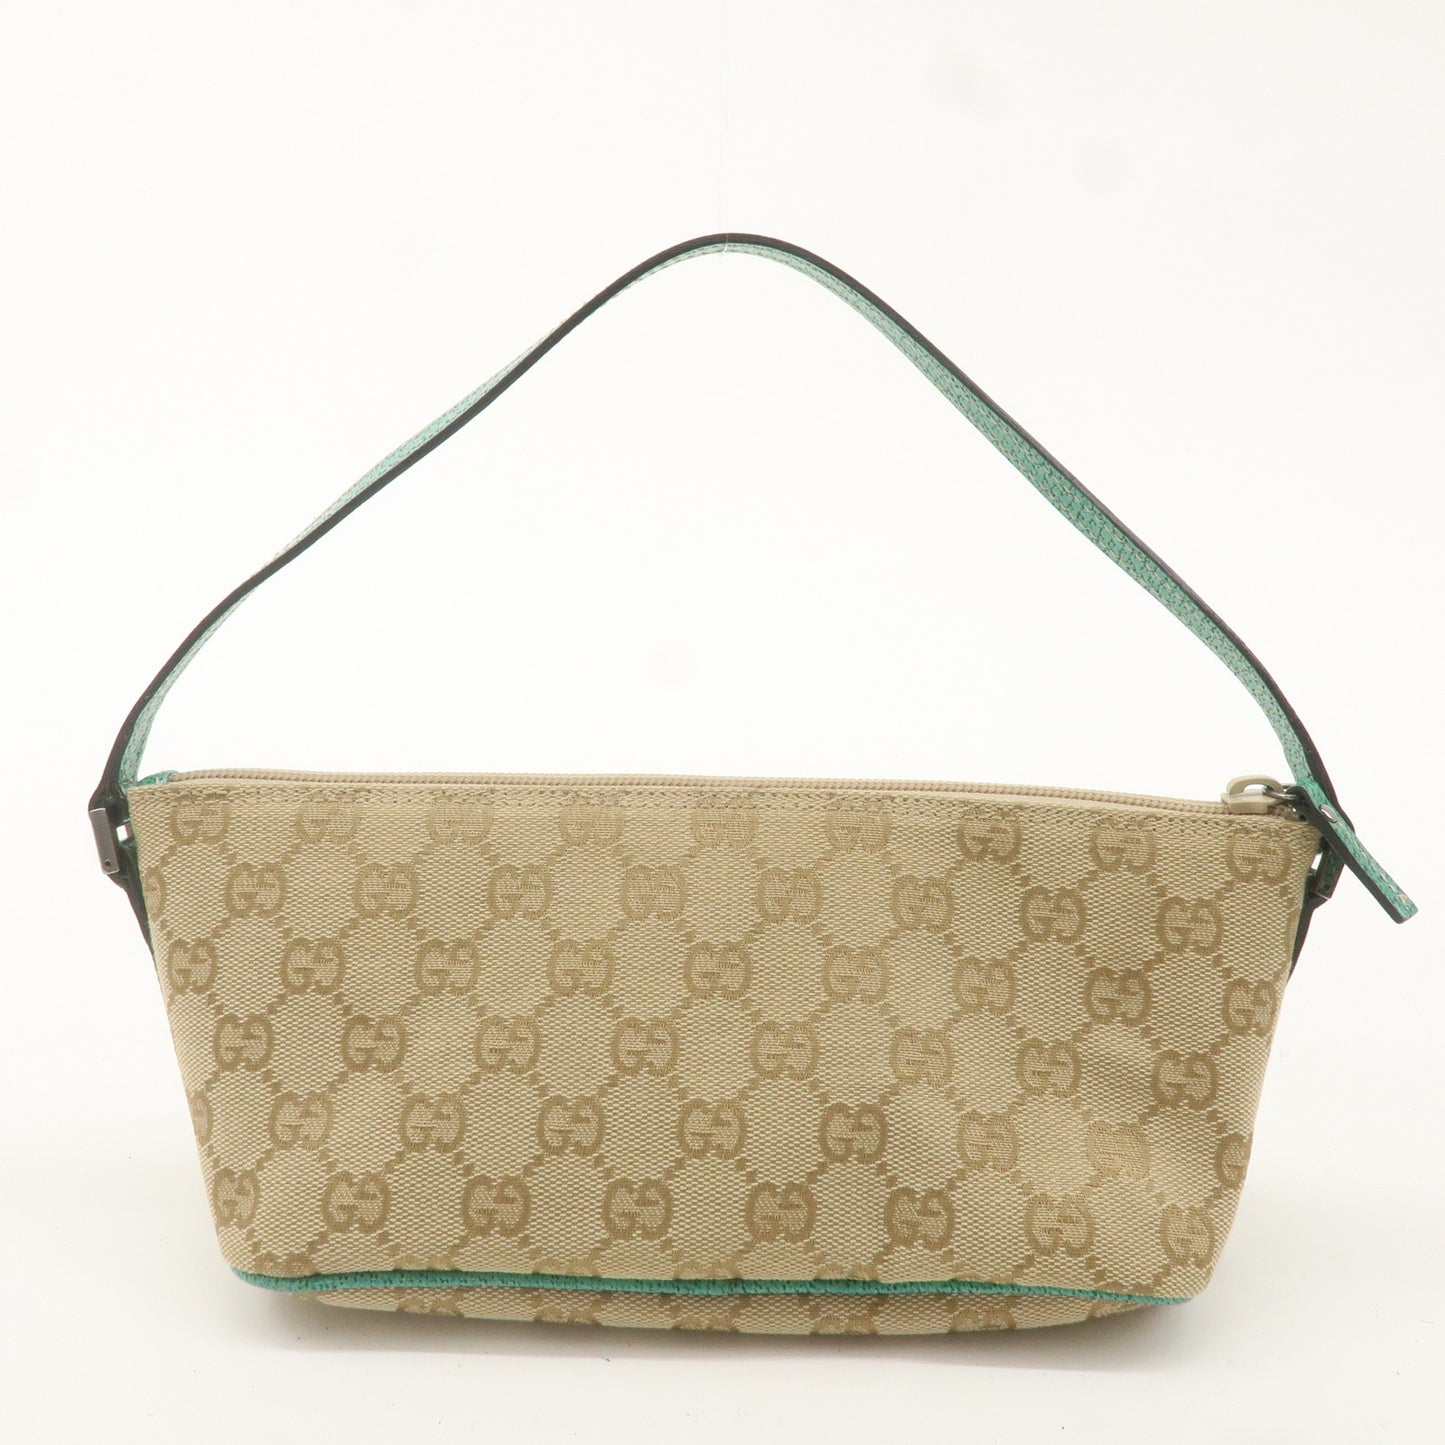 GUCCI Boat Bag GG Canvas Leather Hand Bag Pouch Beige Green 7198